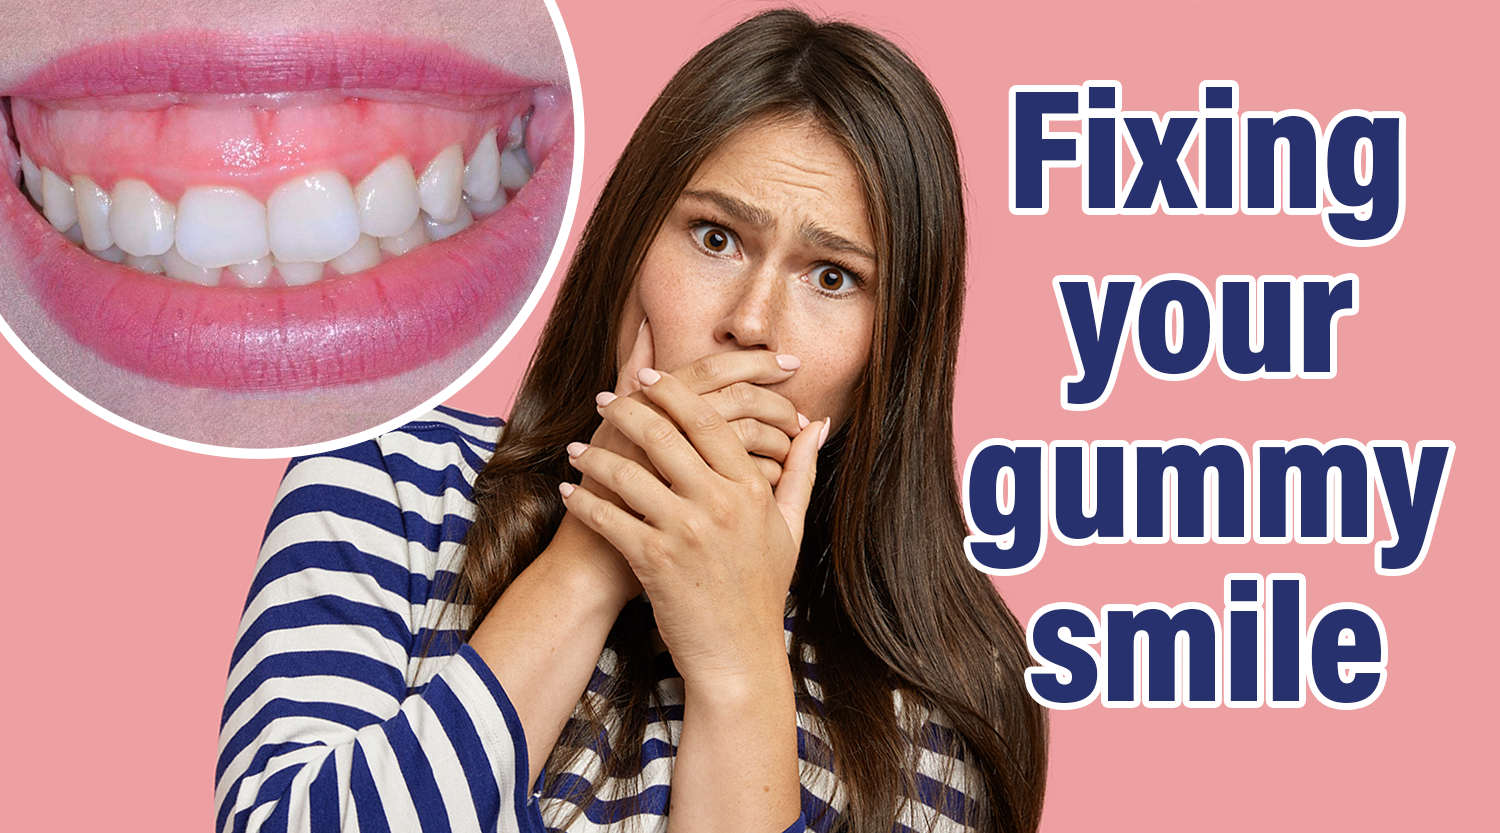 Is Your Gummy Smile a Real Problem?